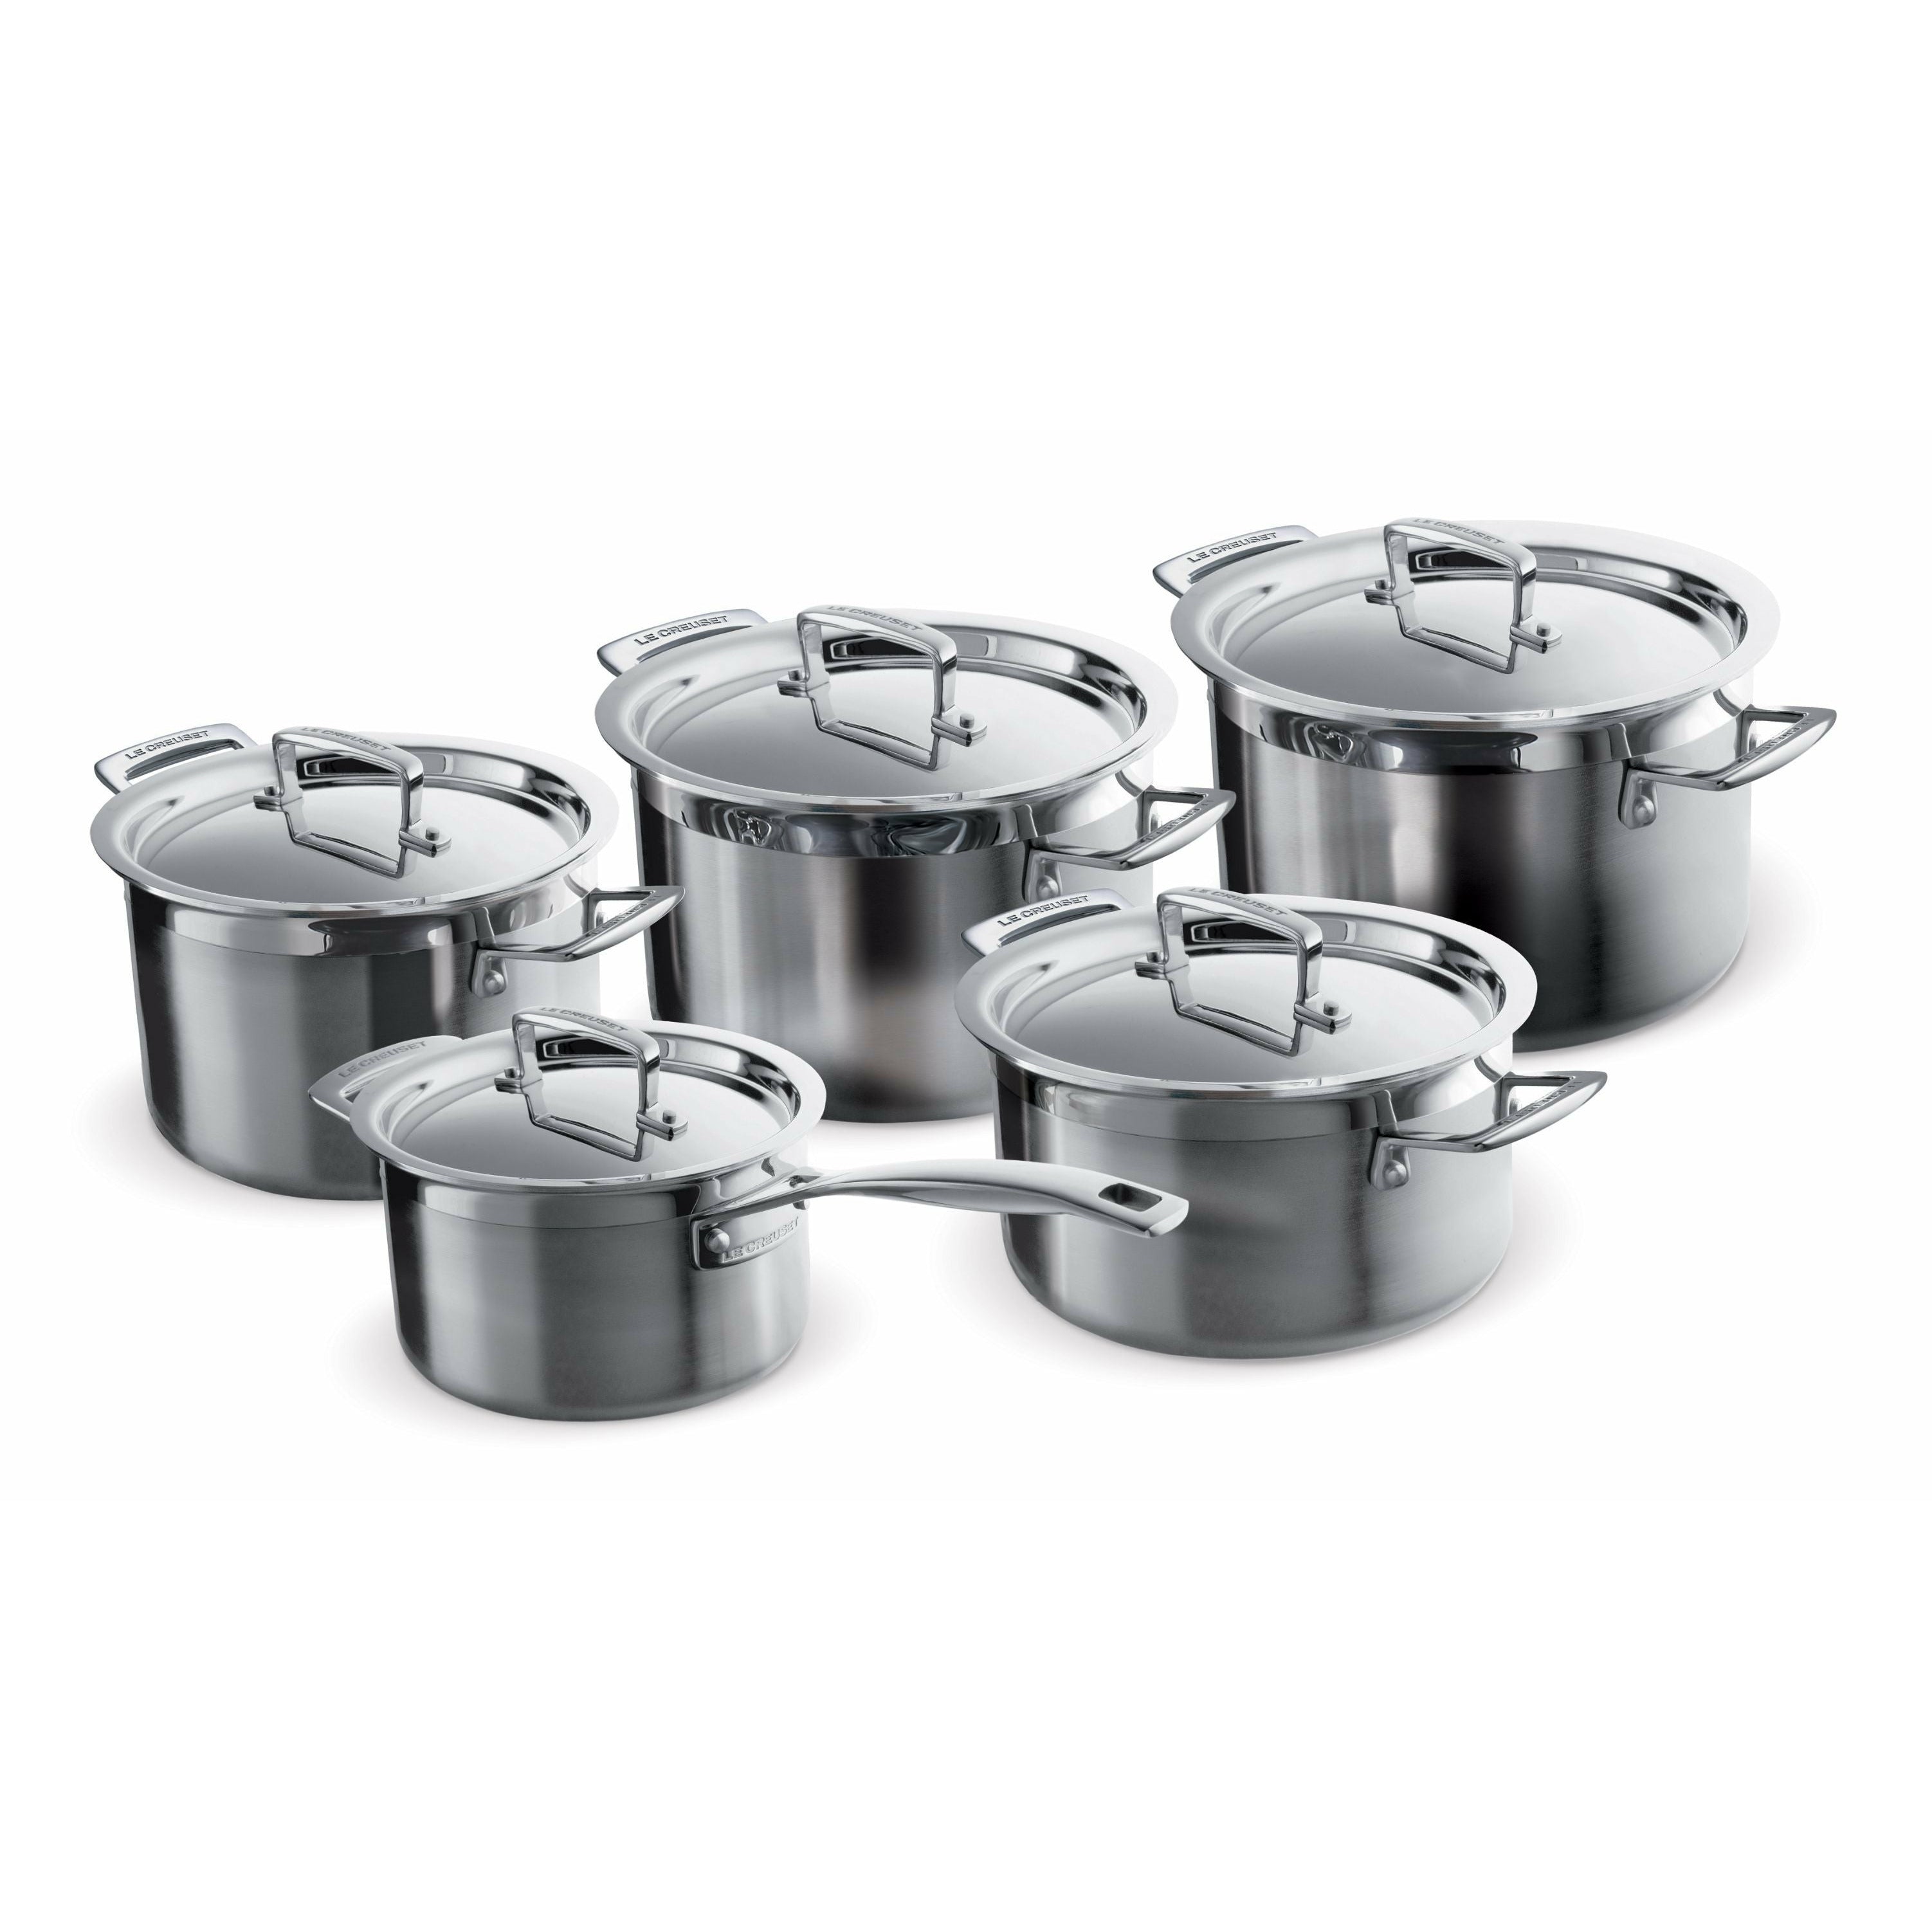 Le Creuset 3 Ply Stainless Steel 5 Piece Cookware Set, 18+20+24+20+16 Cm